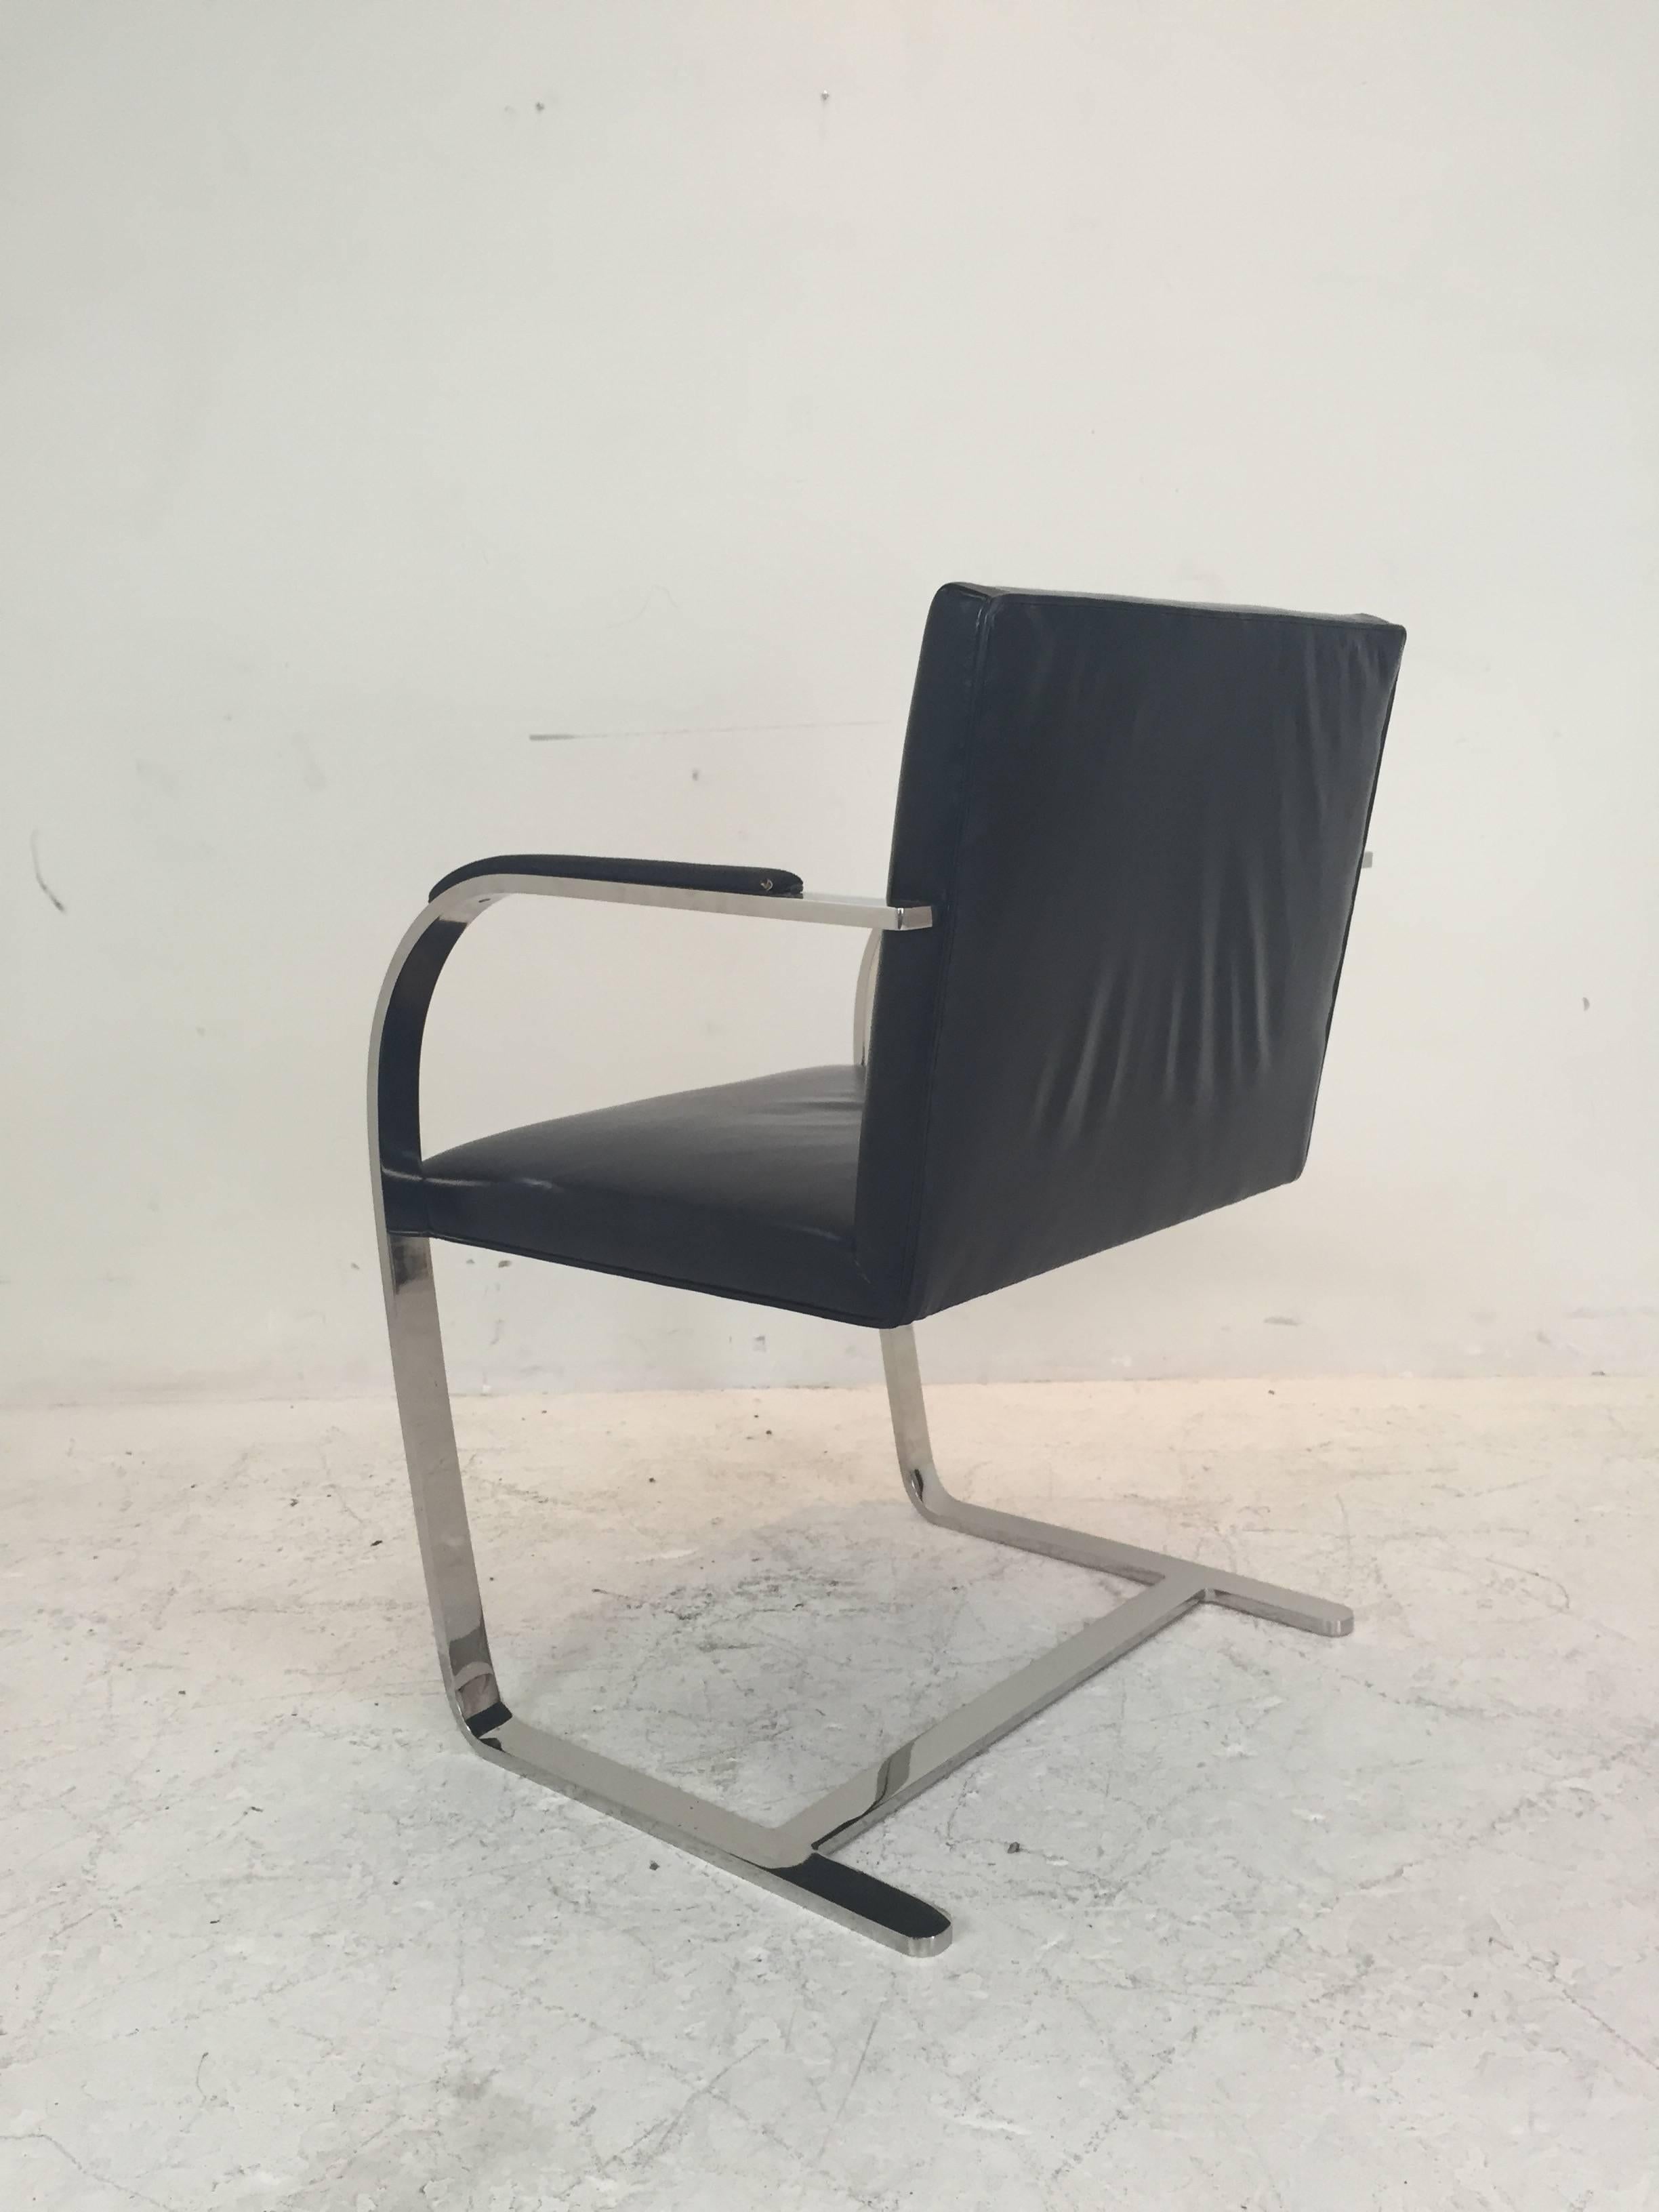 Four Stainless Brno Chairs with Sharkskin Arm Pads 2